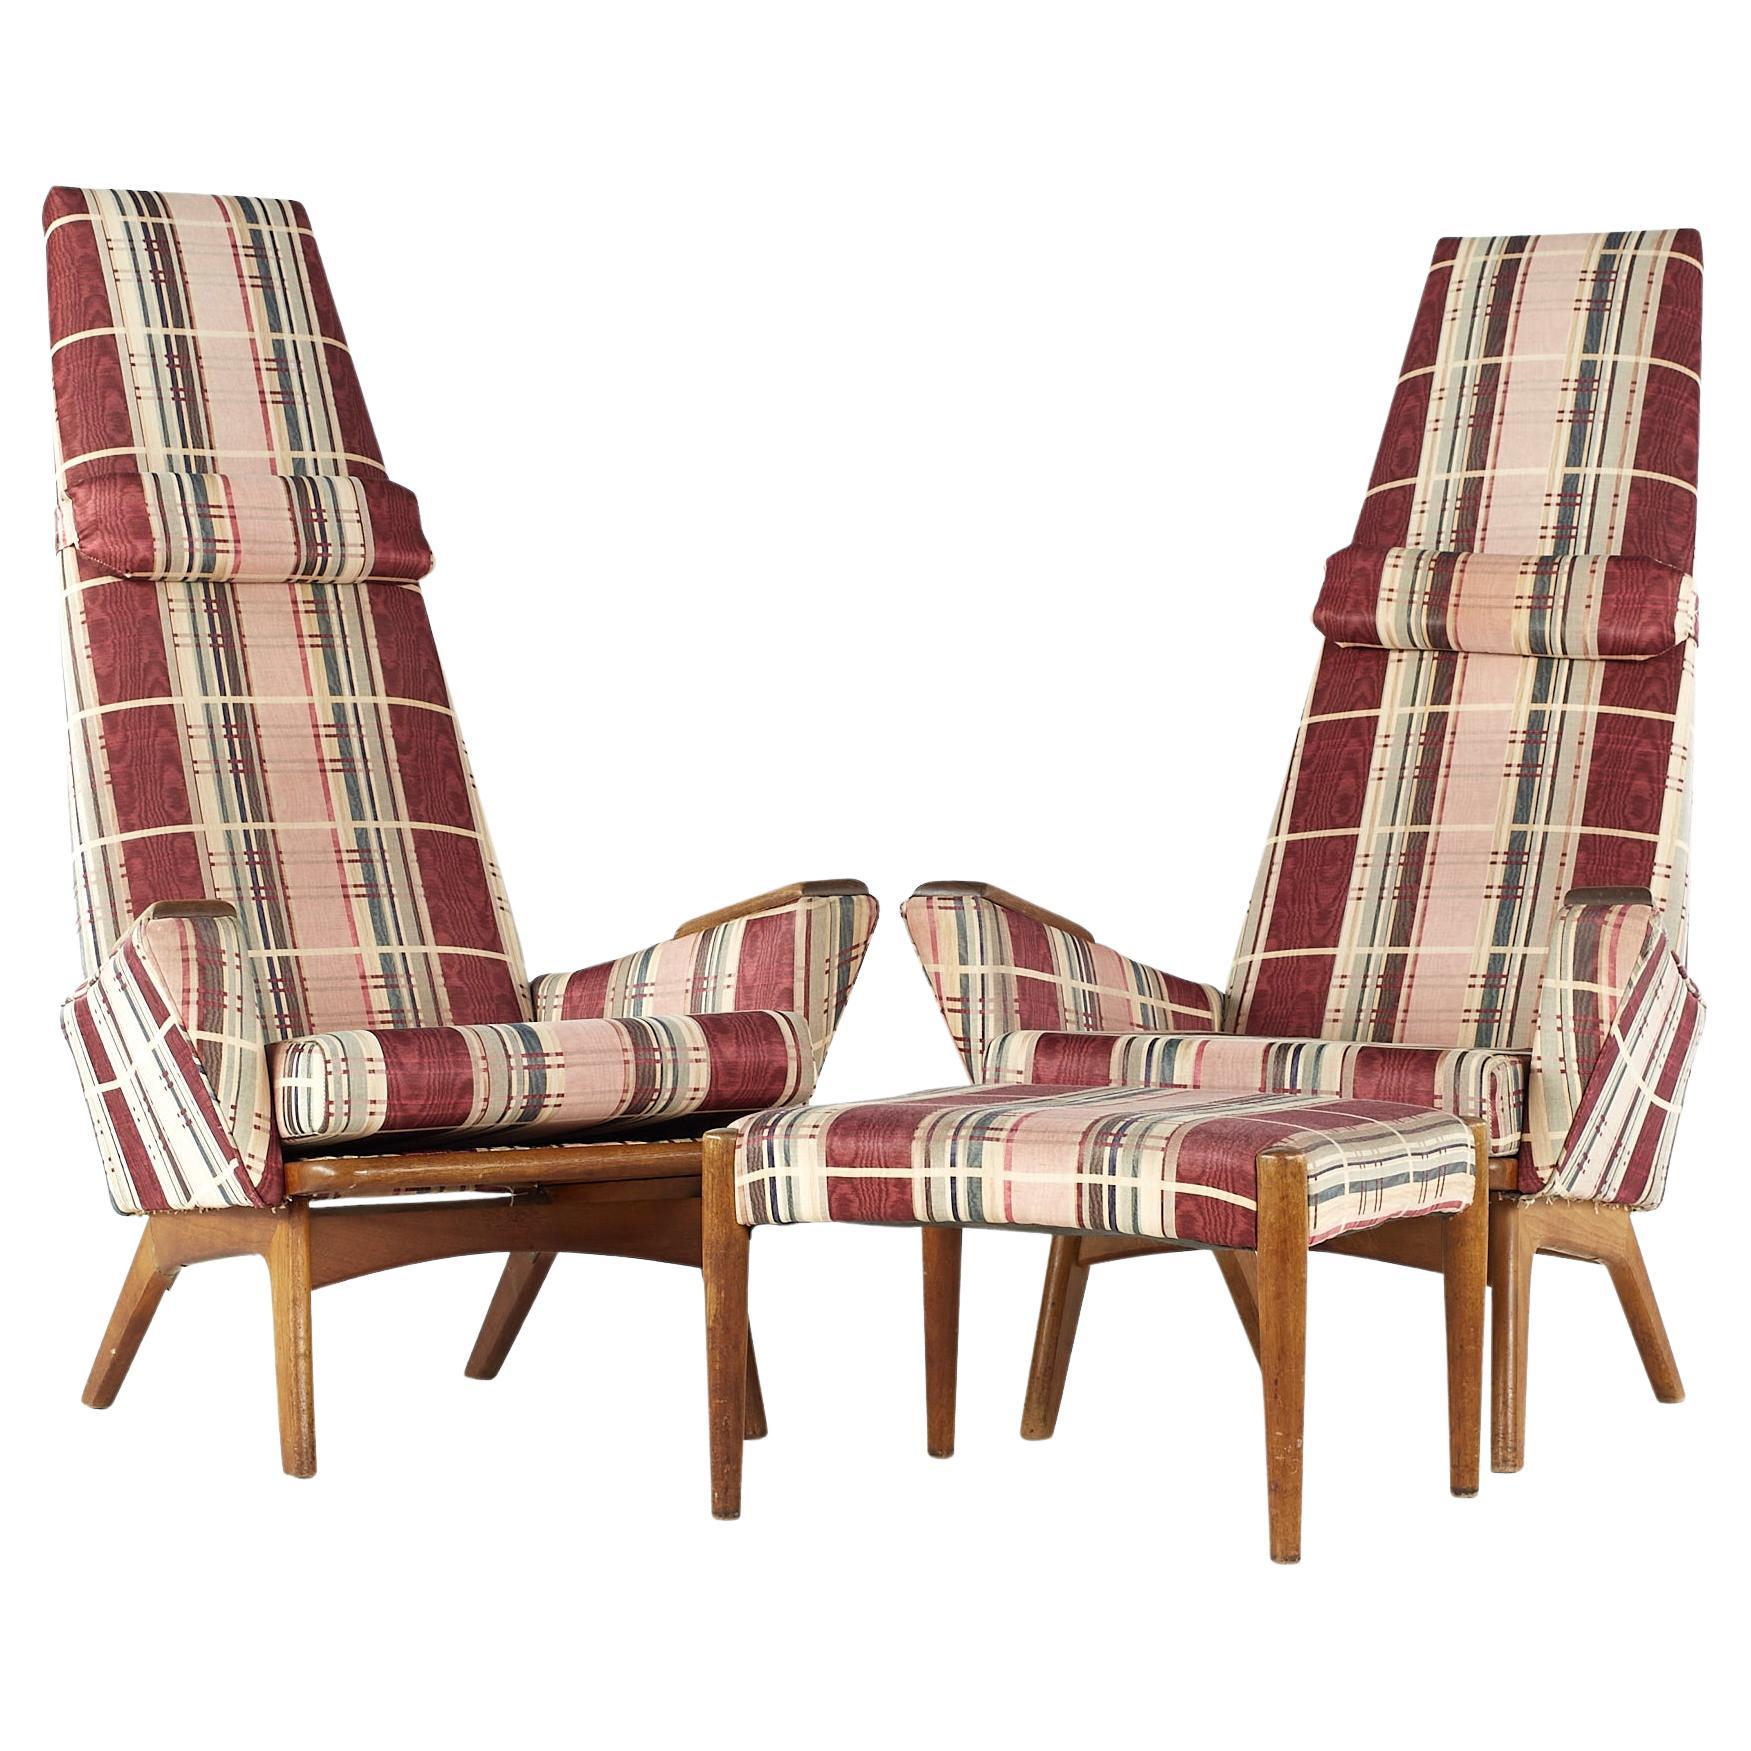 Adrian Pearsall for Craft Associates MCM Slim Jim Highback Lounge Chair, Pair For Sale